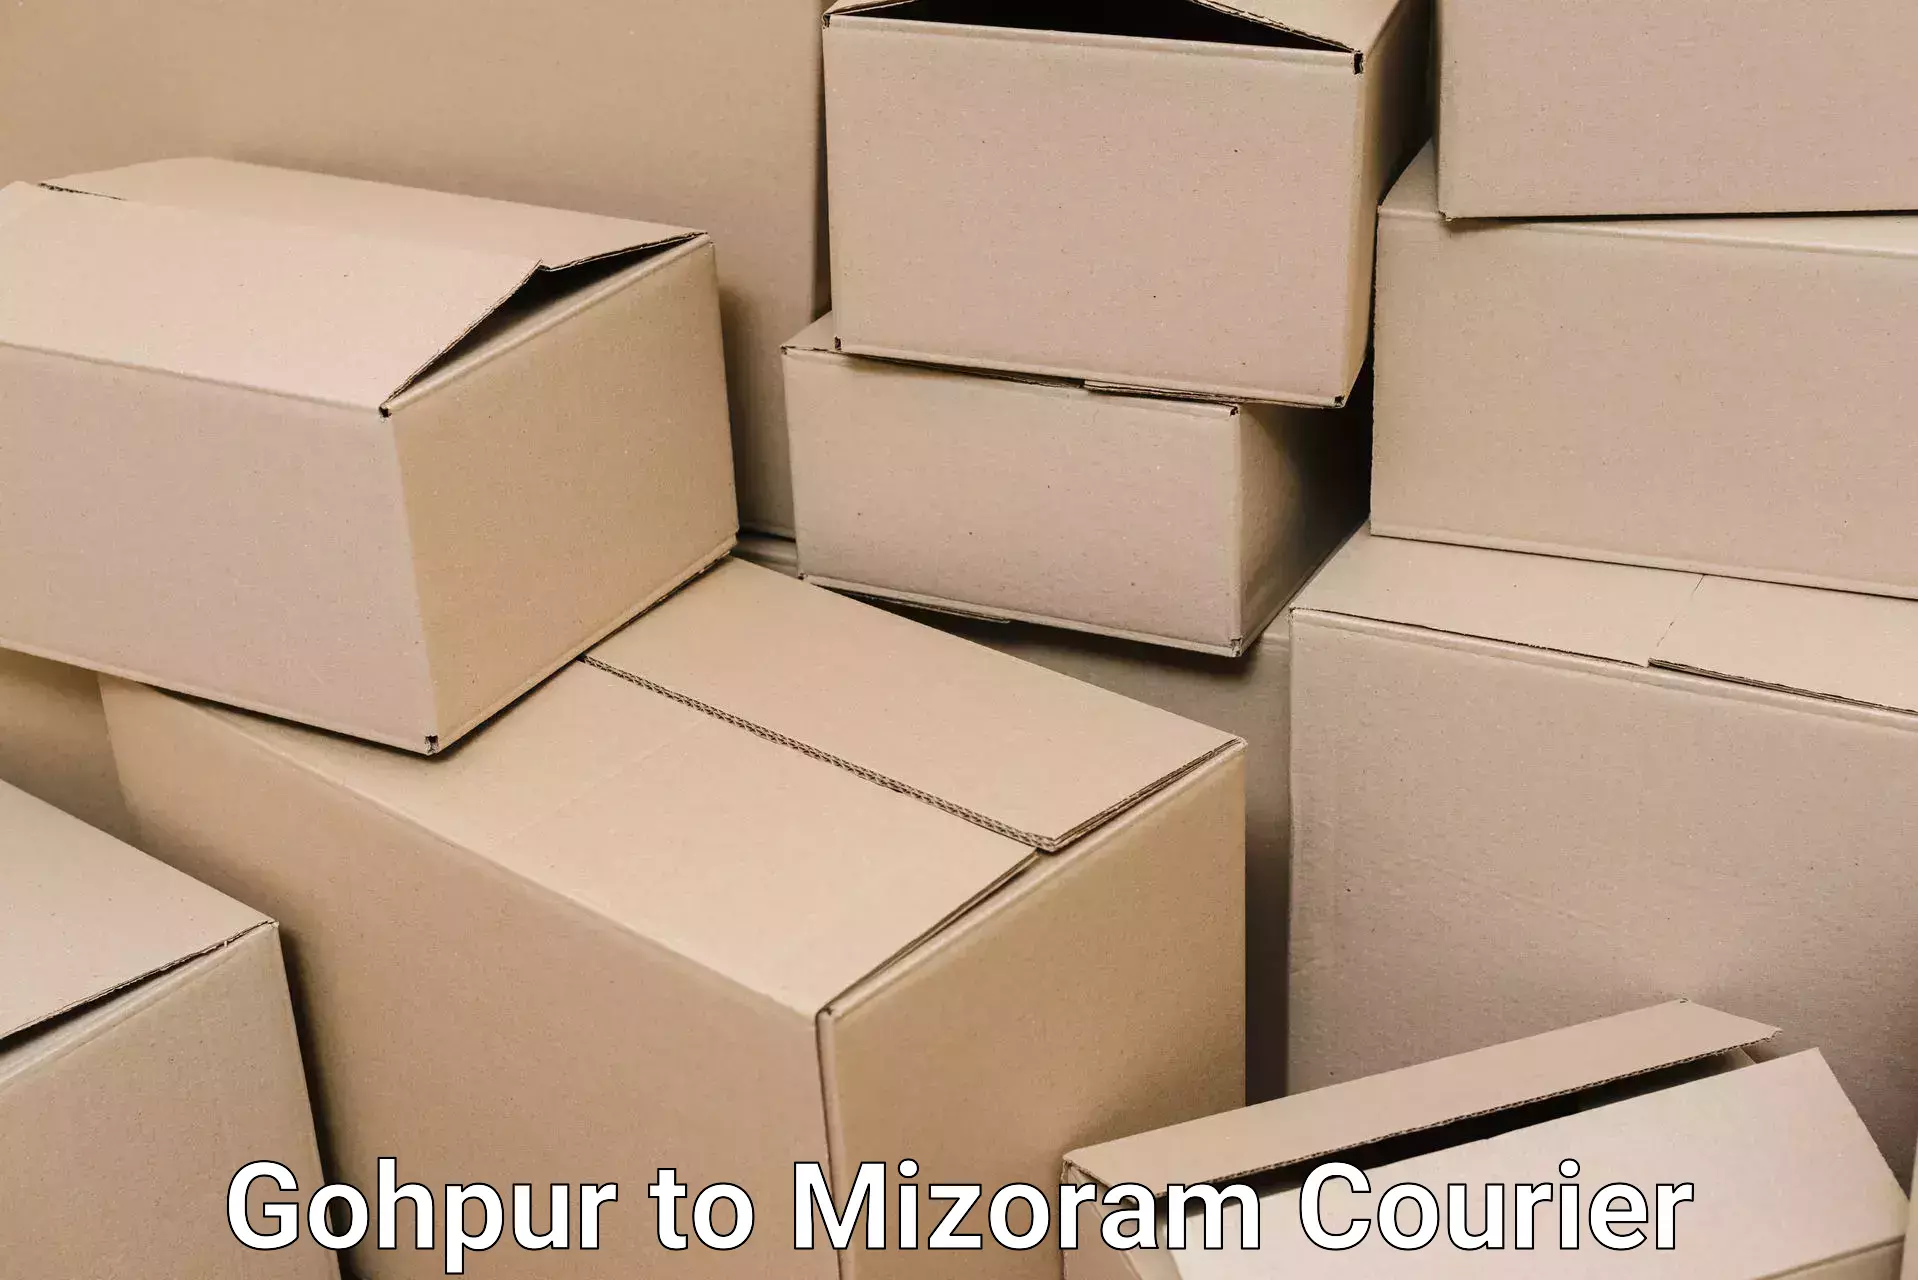 Moving and packing experts Gohpur to Aizawl